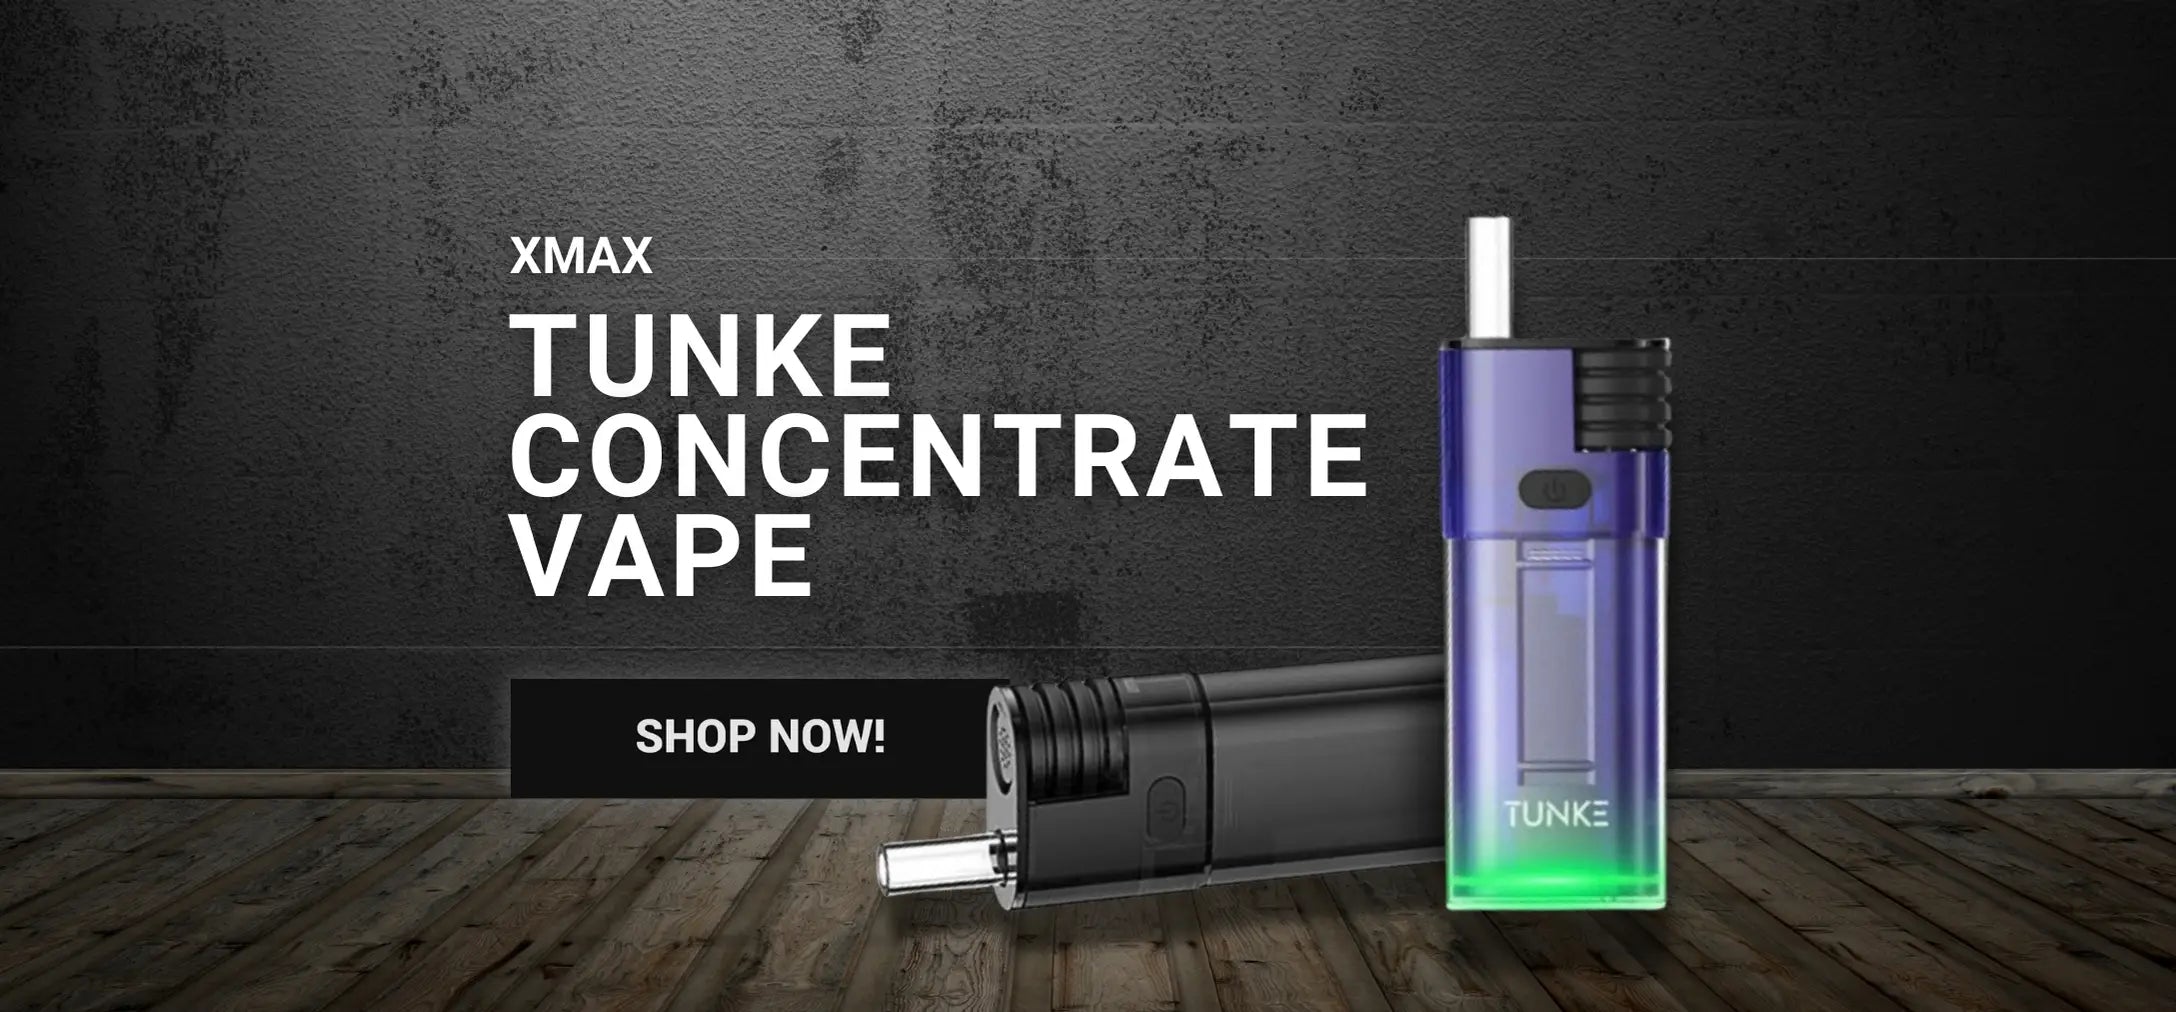 Xmax Tunke Concentrate Vape